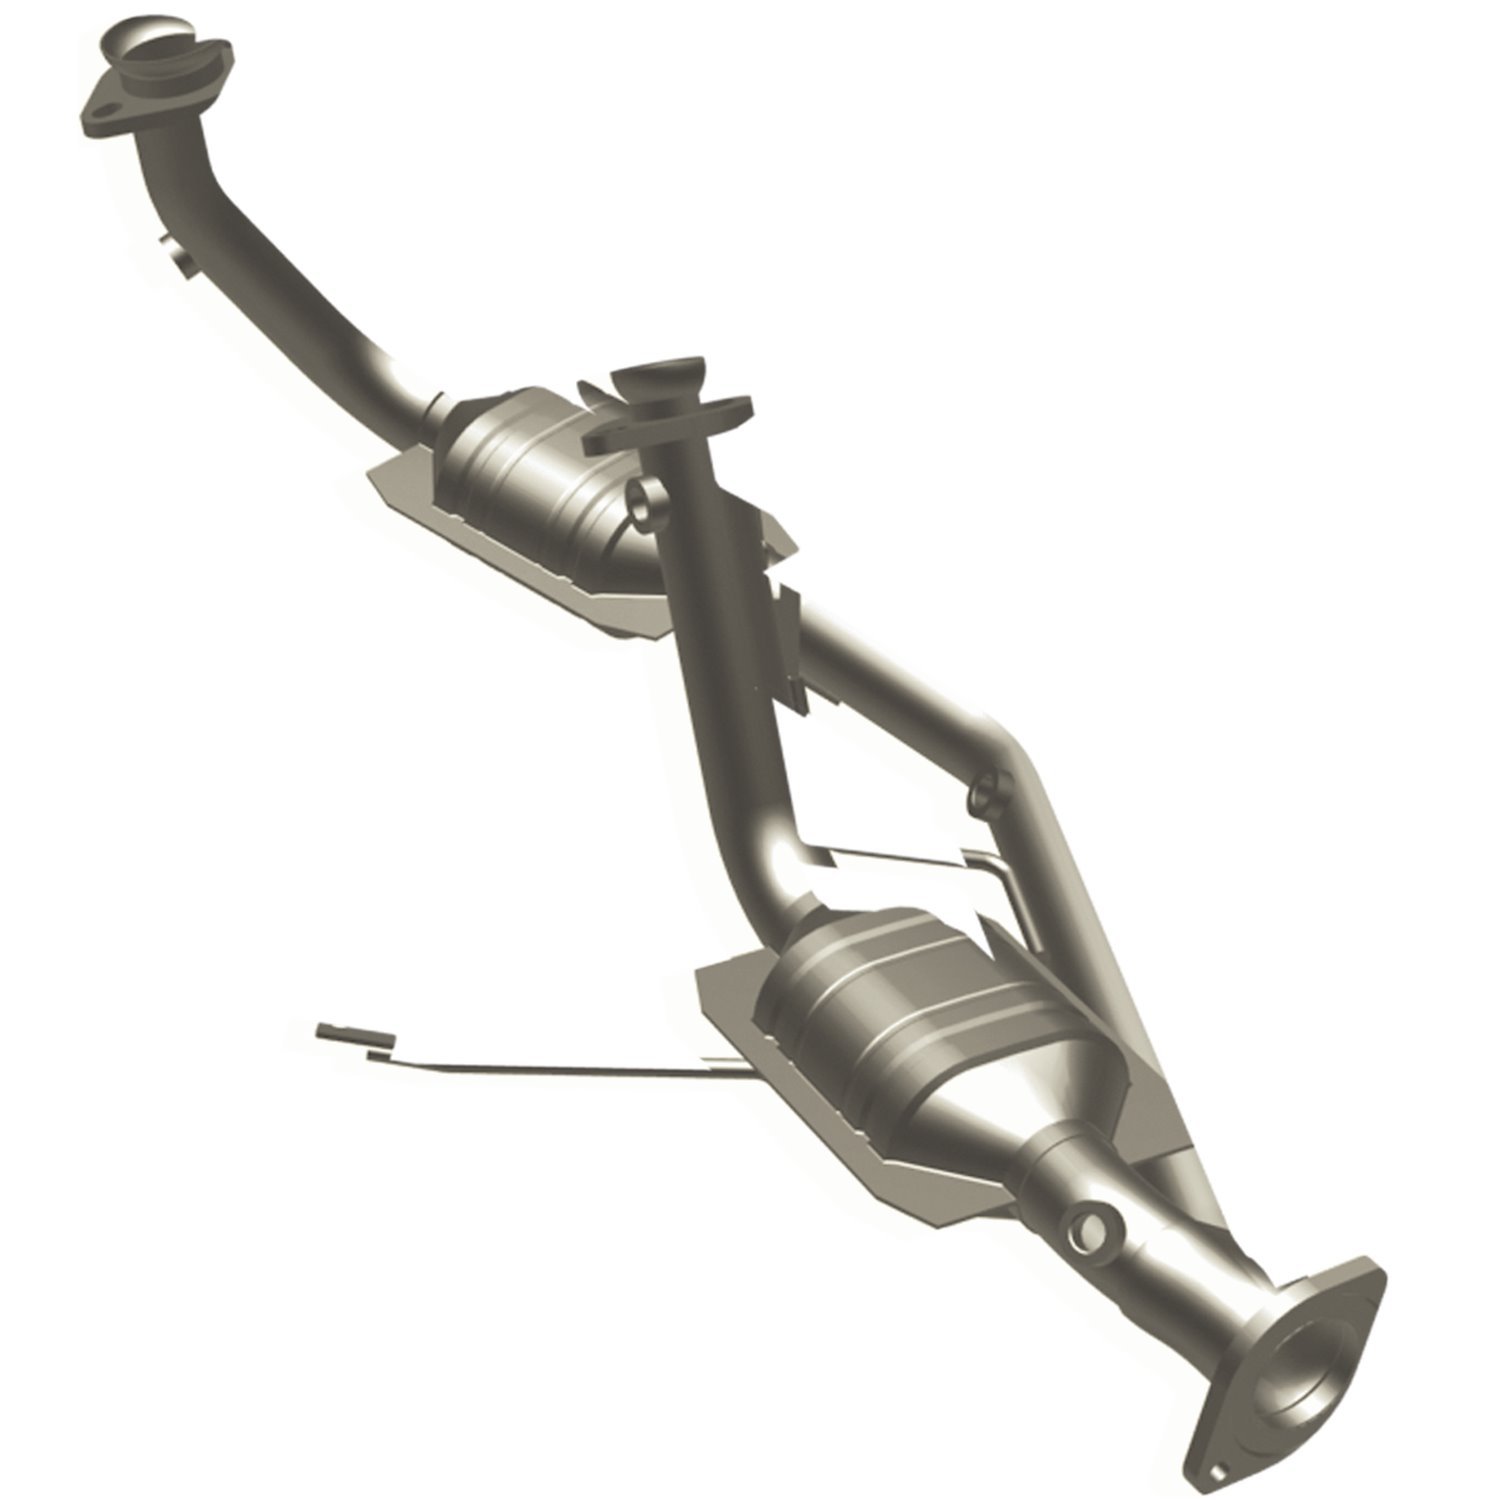 Direct-Fit Catalytic Converter 1996-1999 Ford Taurus/Mercury Sable 3.0L